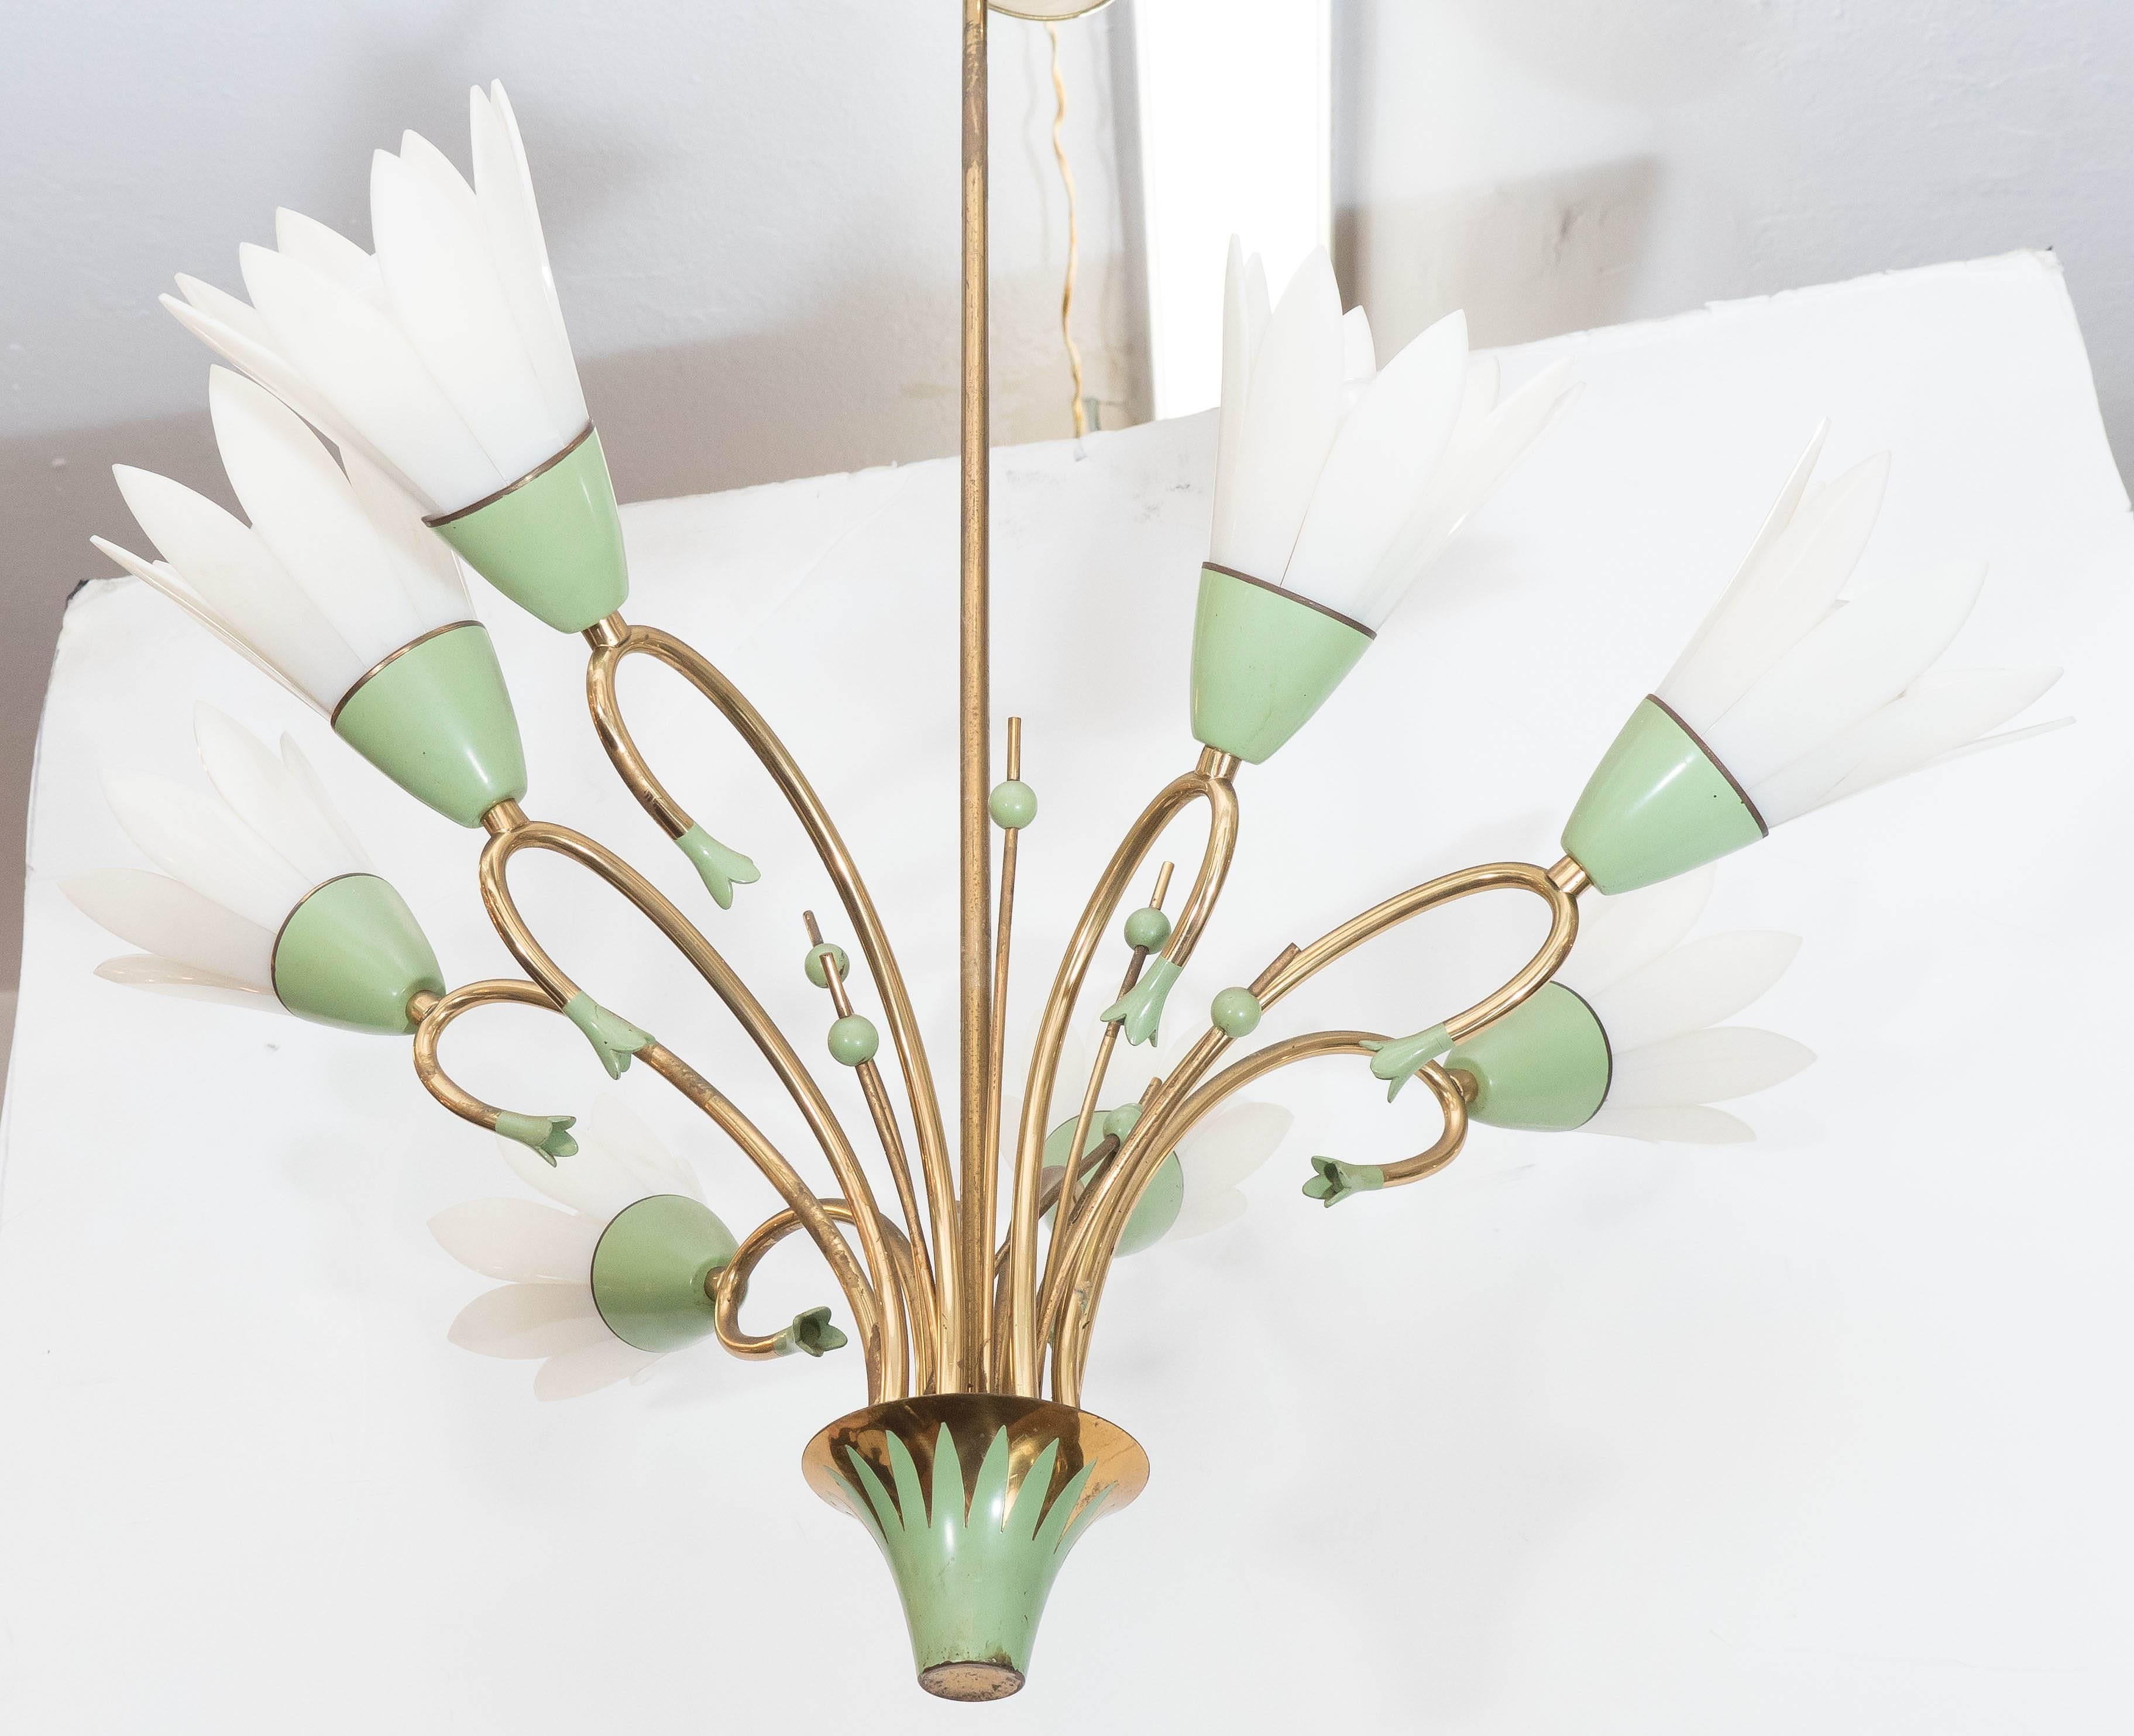 A whimsical circa 1960s chandelier, in brass with pale green enamel detail, with conical base, supporting curved stems and arms, eight with sockets and petal form shades. Requires medium base bulbs. This light fixture remains in very good vintage